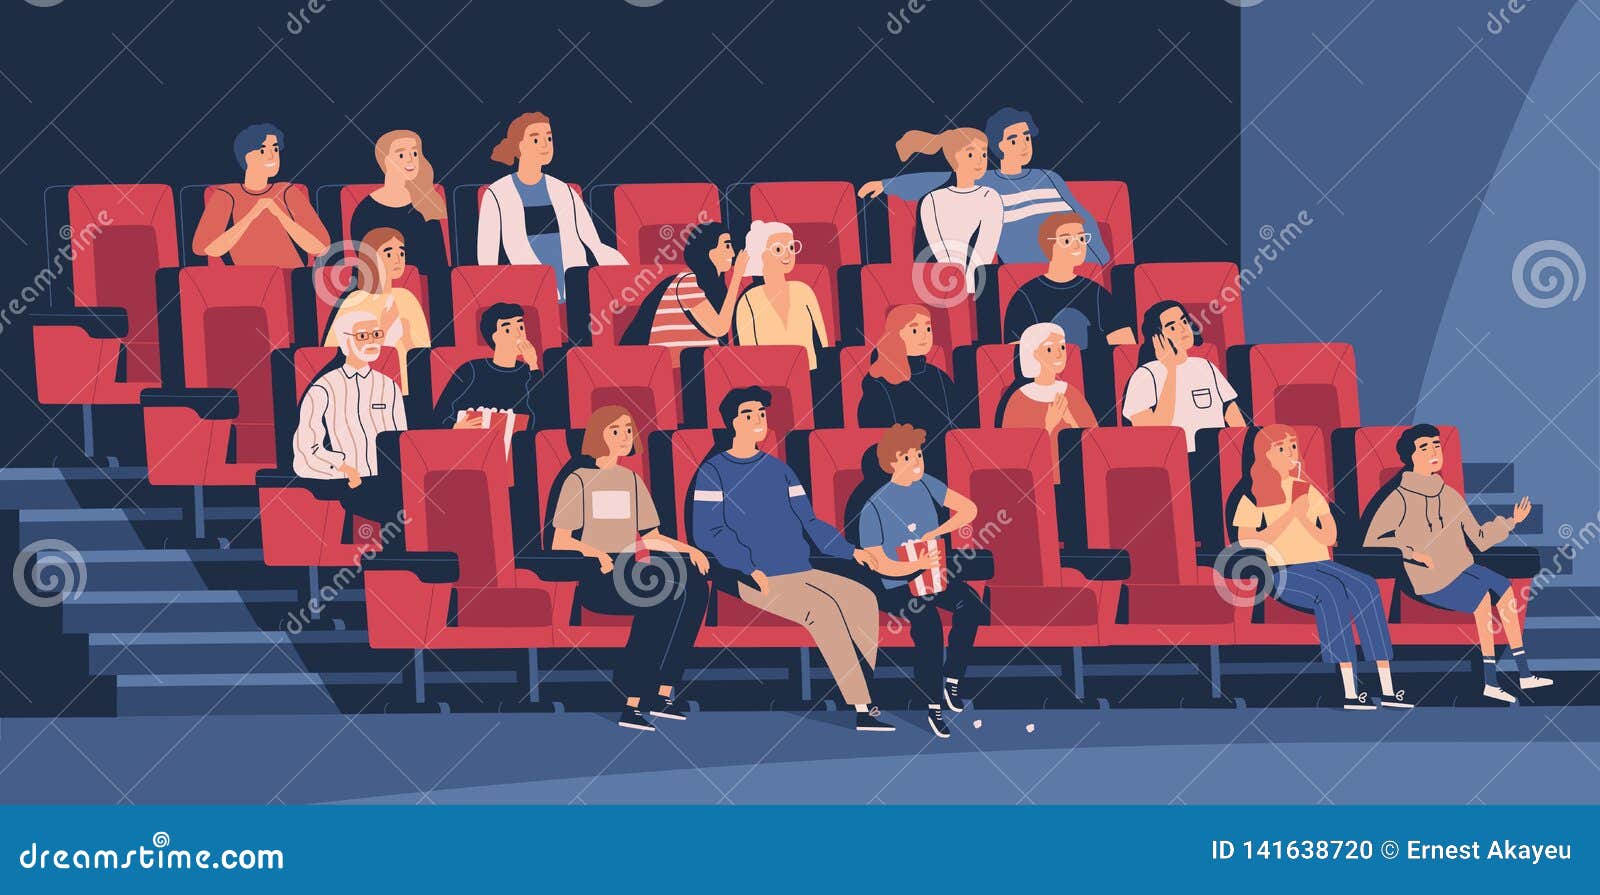 people sitting in chairs at movie theater or cinema auditorium. young and old men, women and children watching film or